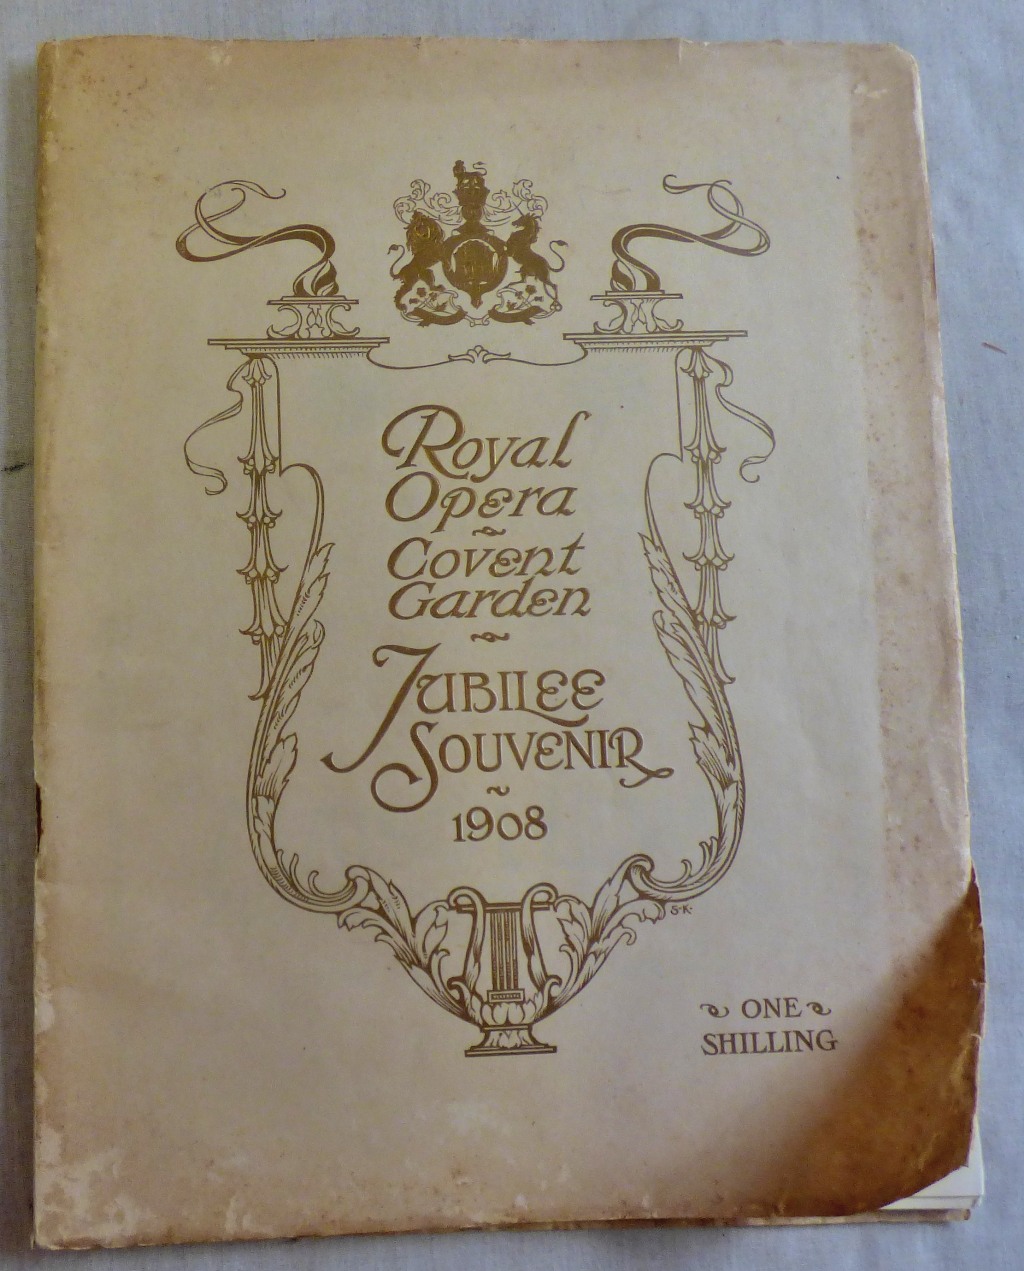 London Royal Opera House Covent Garden 1908 Jubilee Souvenir; cover grubby but inner very clean with